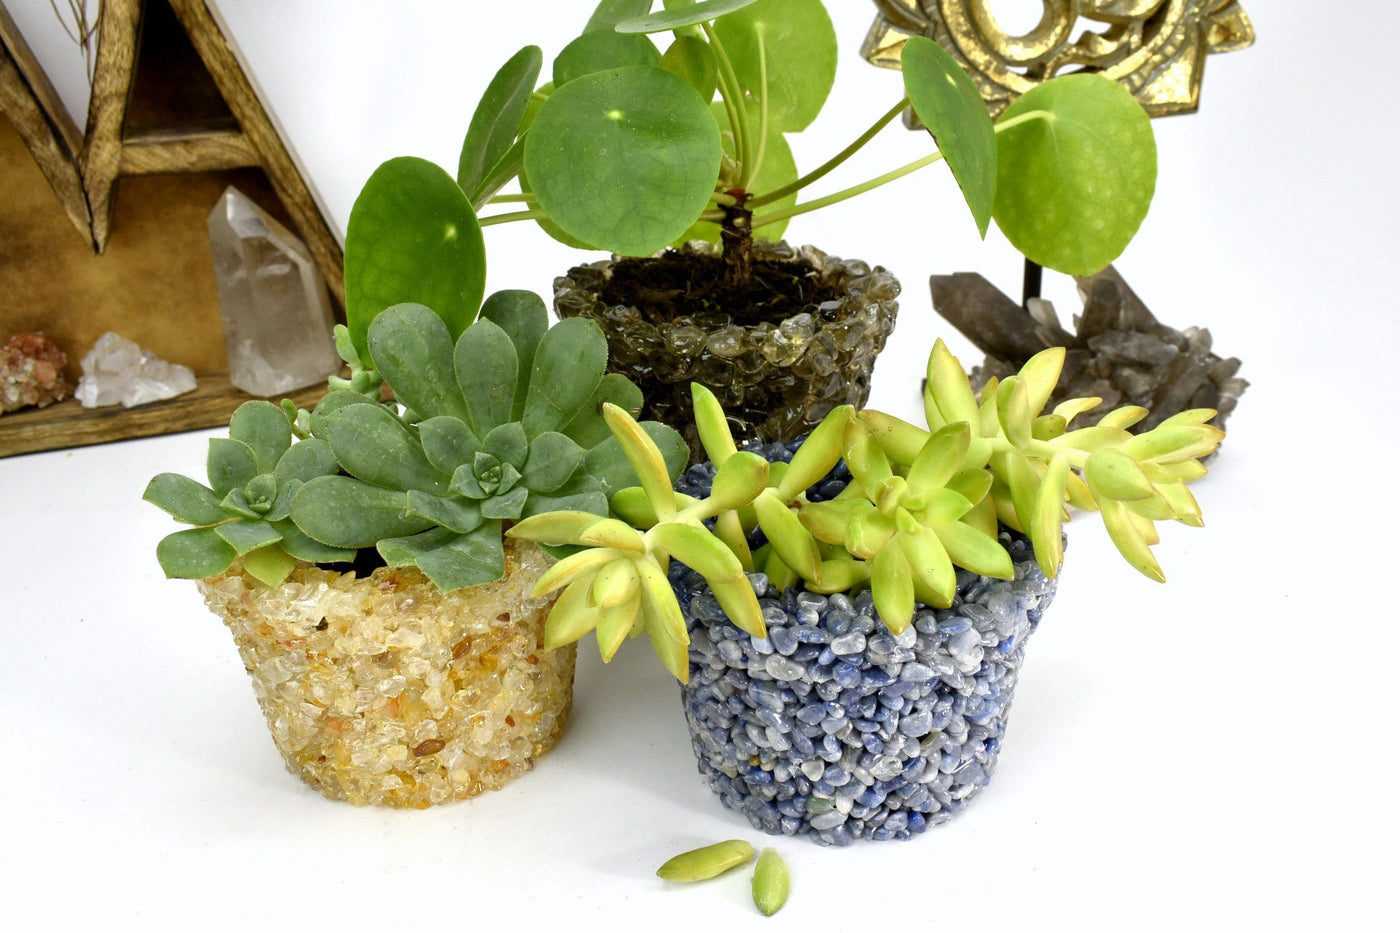 tumbled stone flower pots displayed as home decor 